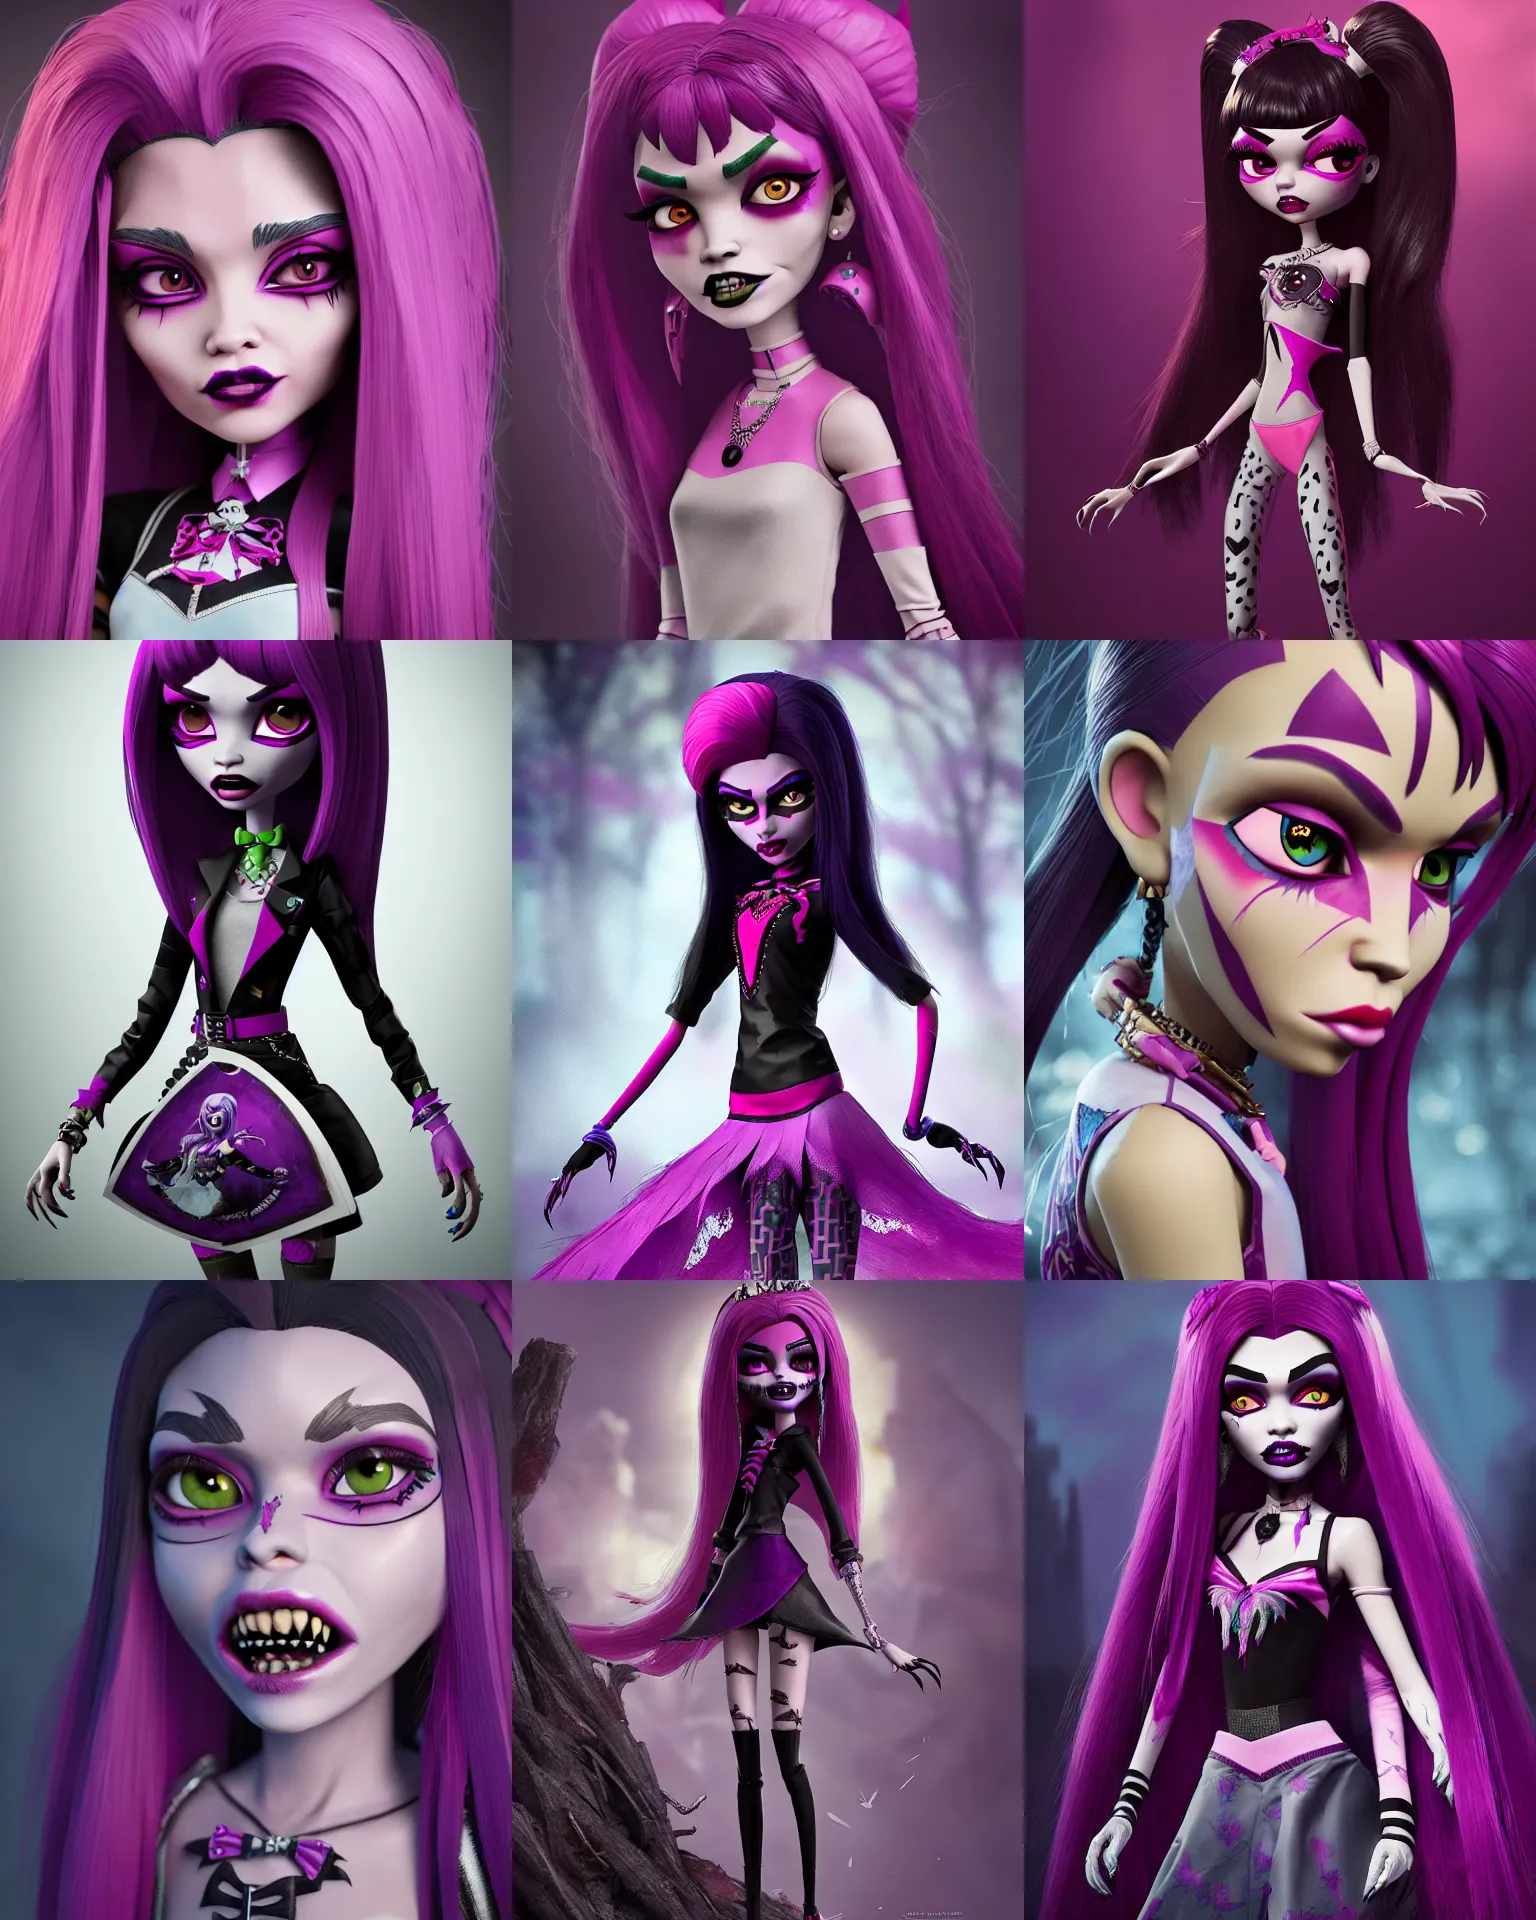 madison beer : : 1 0 as monster high draculaura : : 5 | Stable ...